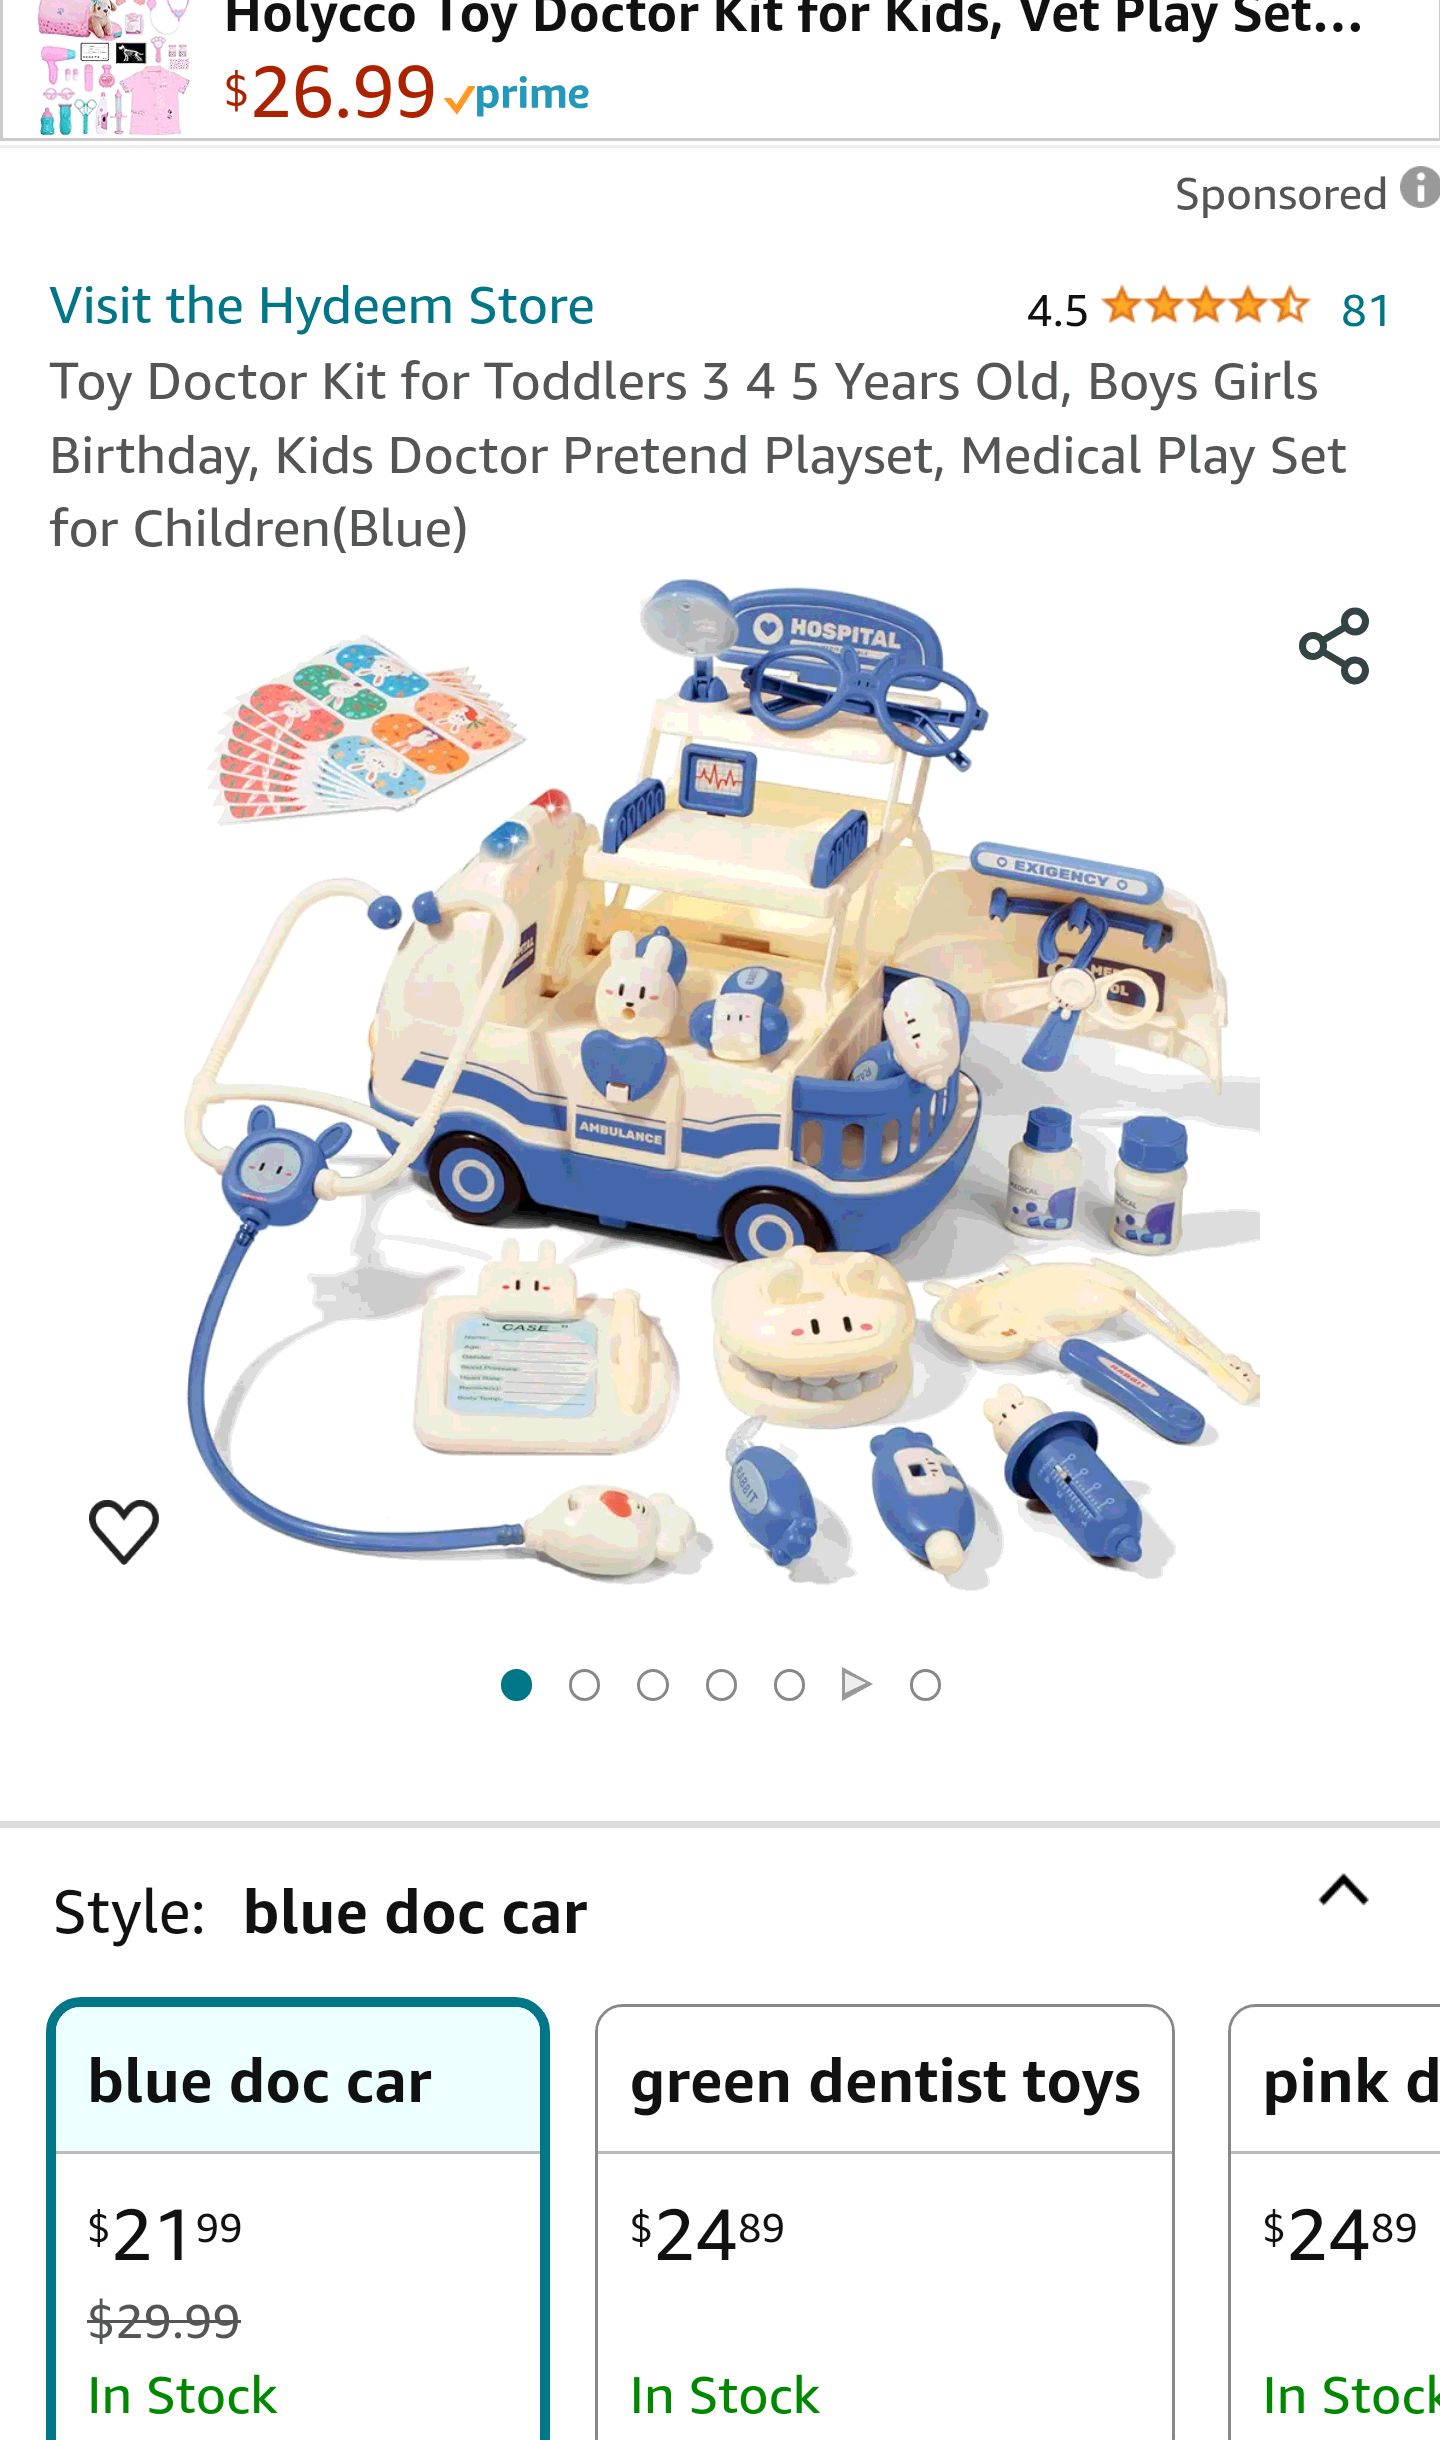 Hydeem Toy Doctor Kit for Toddlers 3 4 5 Years Old, Boys Girls Birthday, Kids Doctor Pretend Playset, Medical Play Set for Children(Blue) : Toys & Games